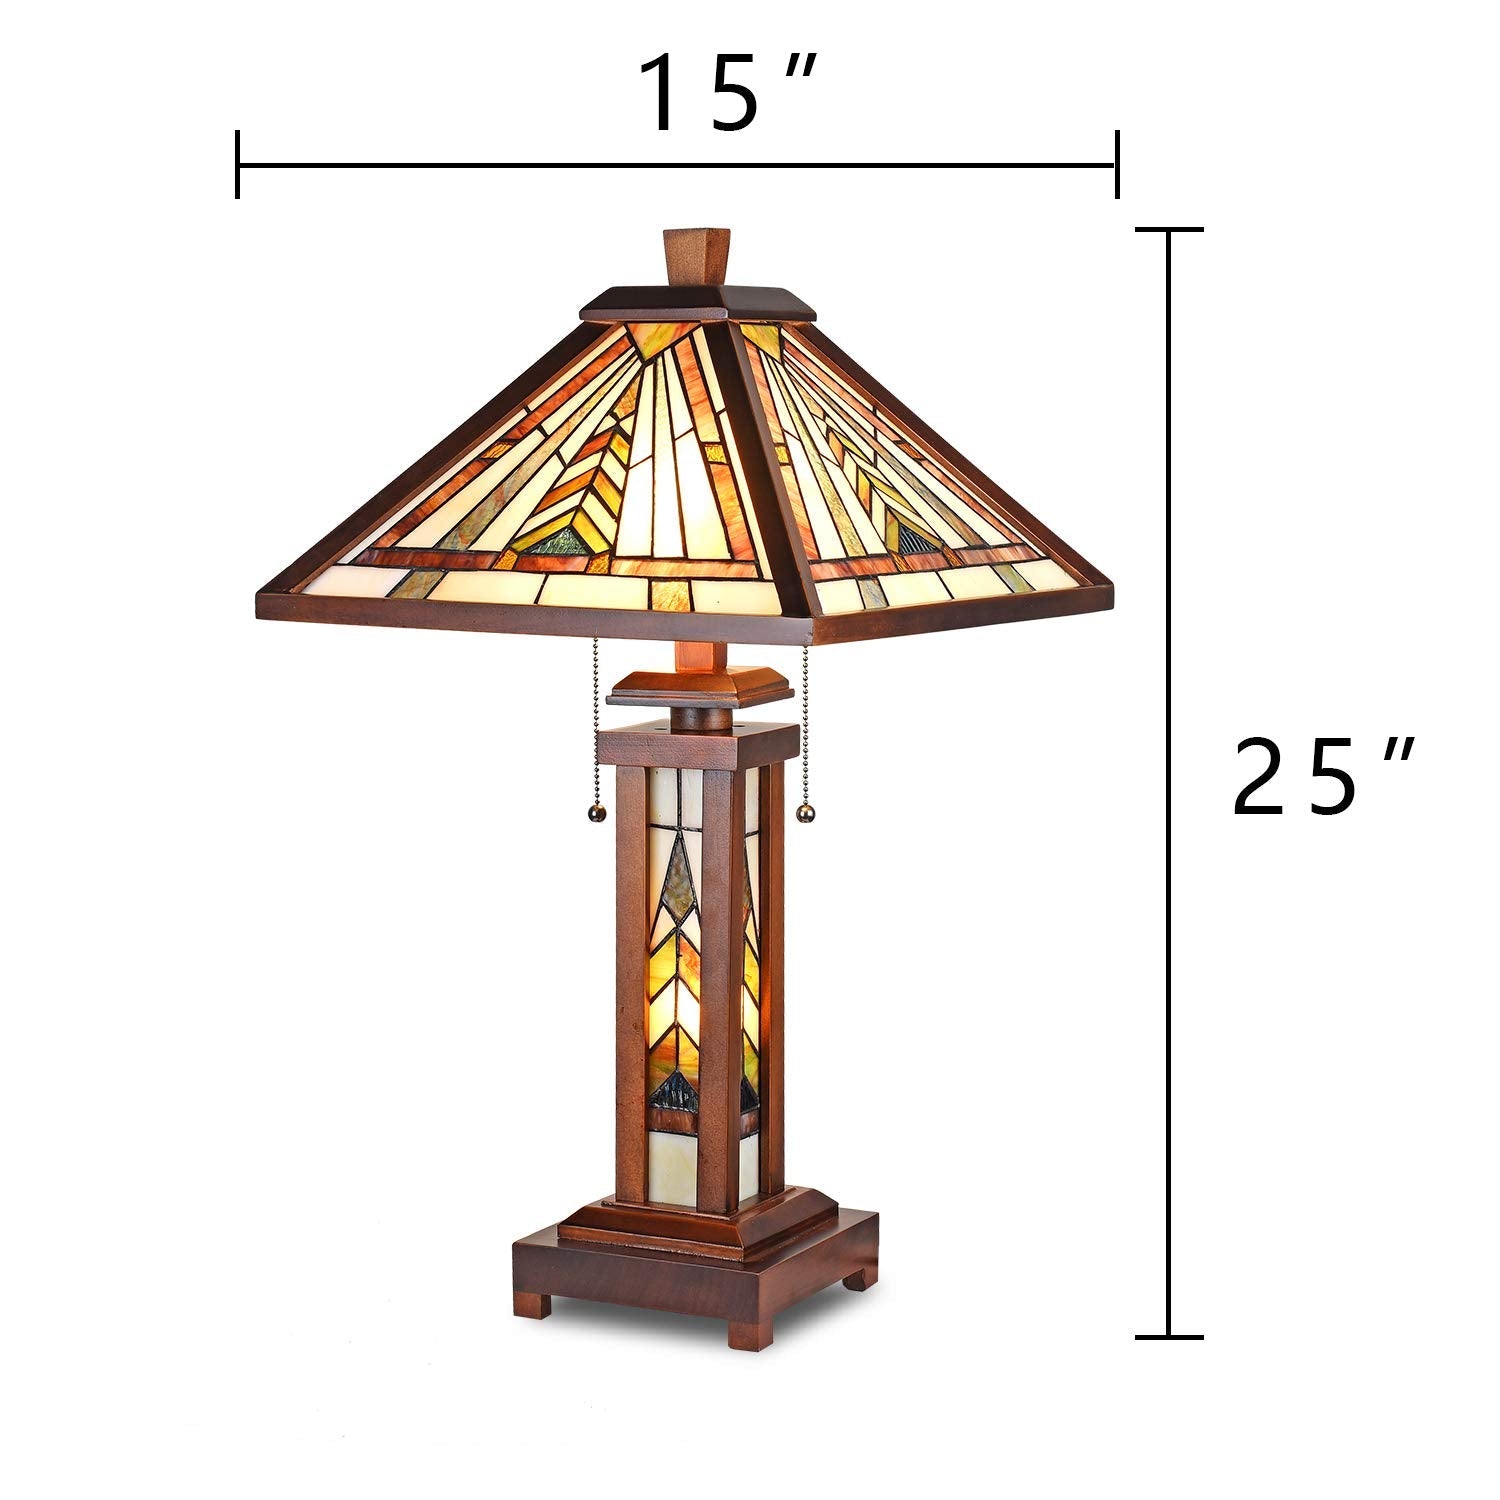 Vinplus  Table Lamp Night Light 16" Wide Handmade Stained Glass Lamp Shade 3 Light Wooden Frame Mission Style Vintage Table Lamp